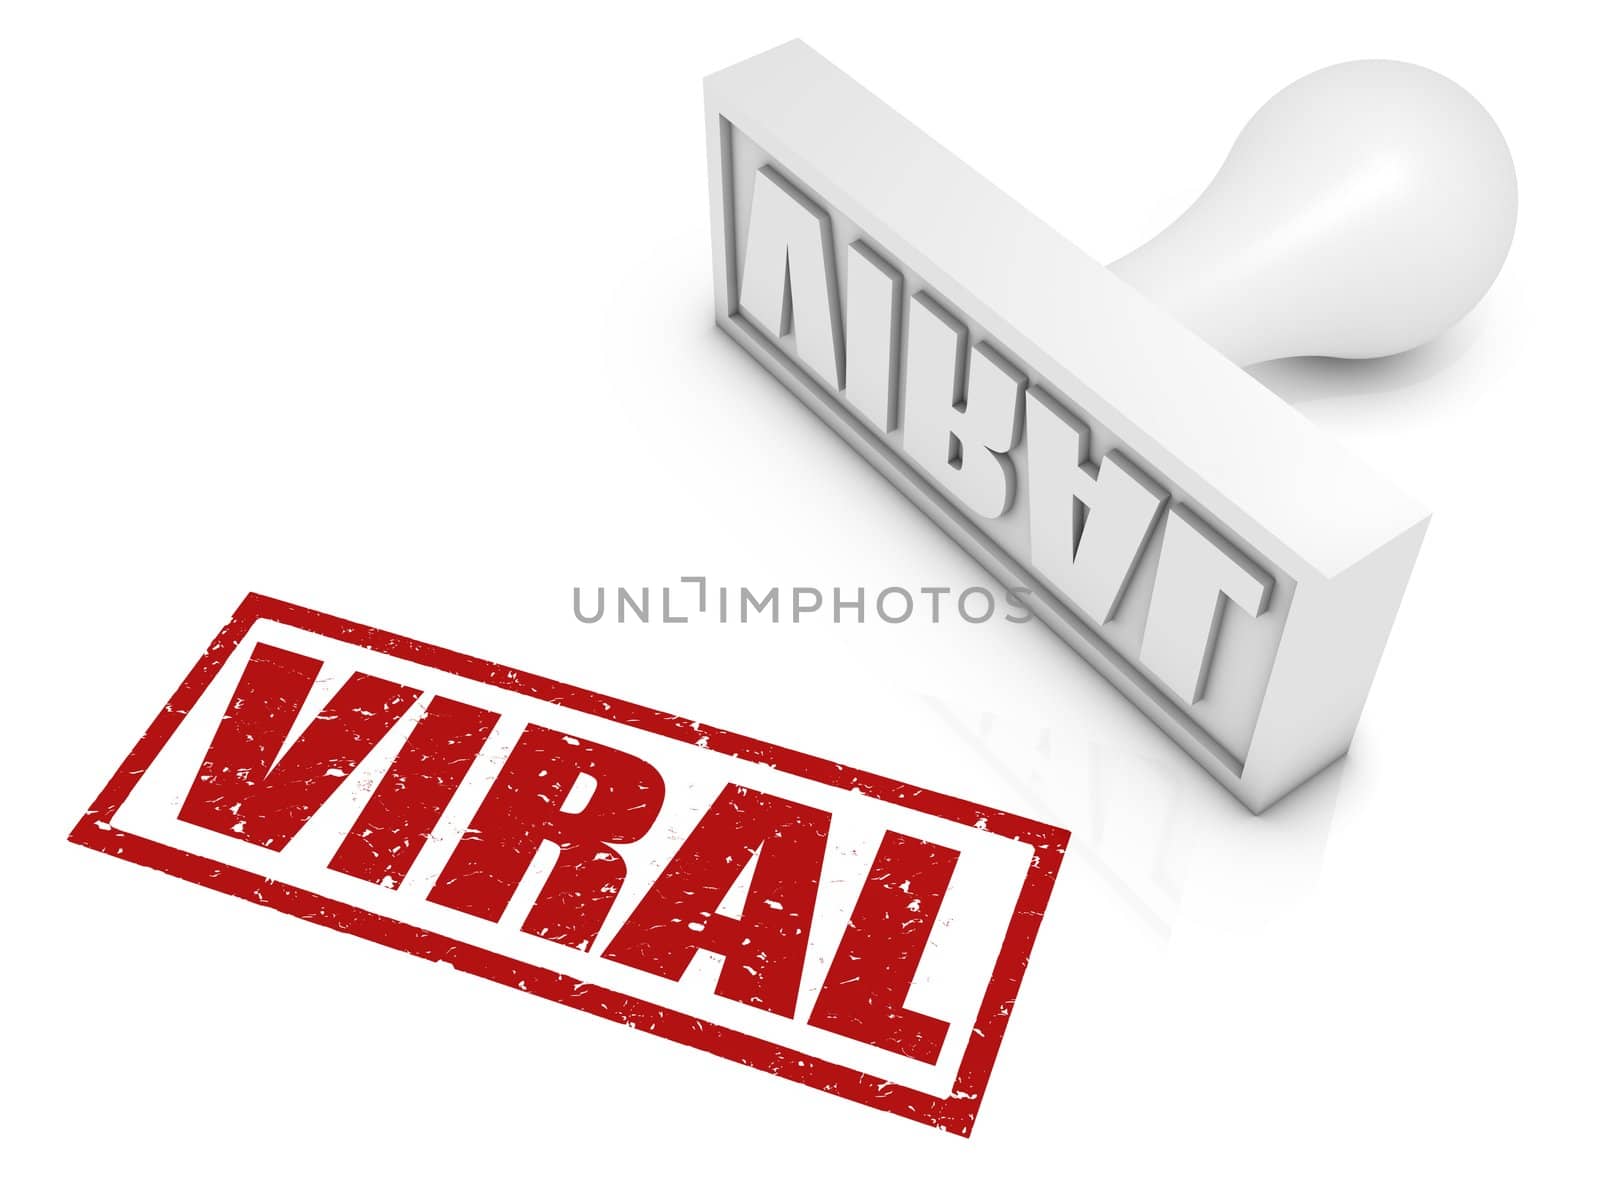 VIRAL rubber stamp. Part of a rubber stamp series.